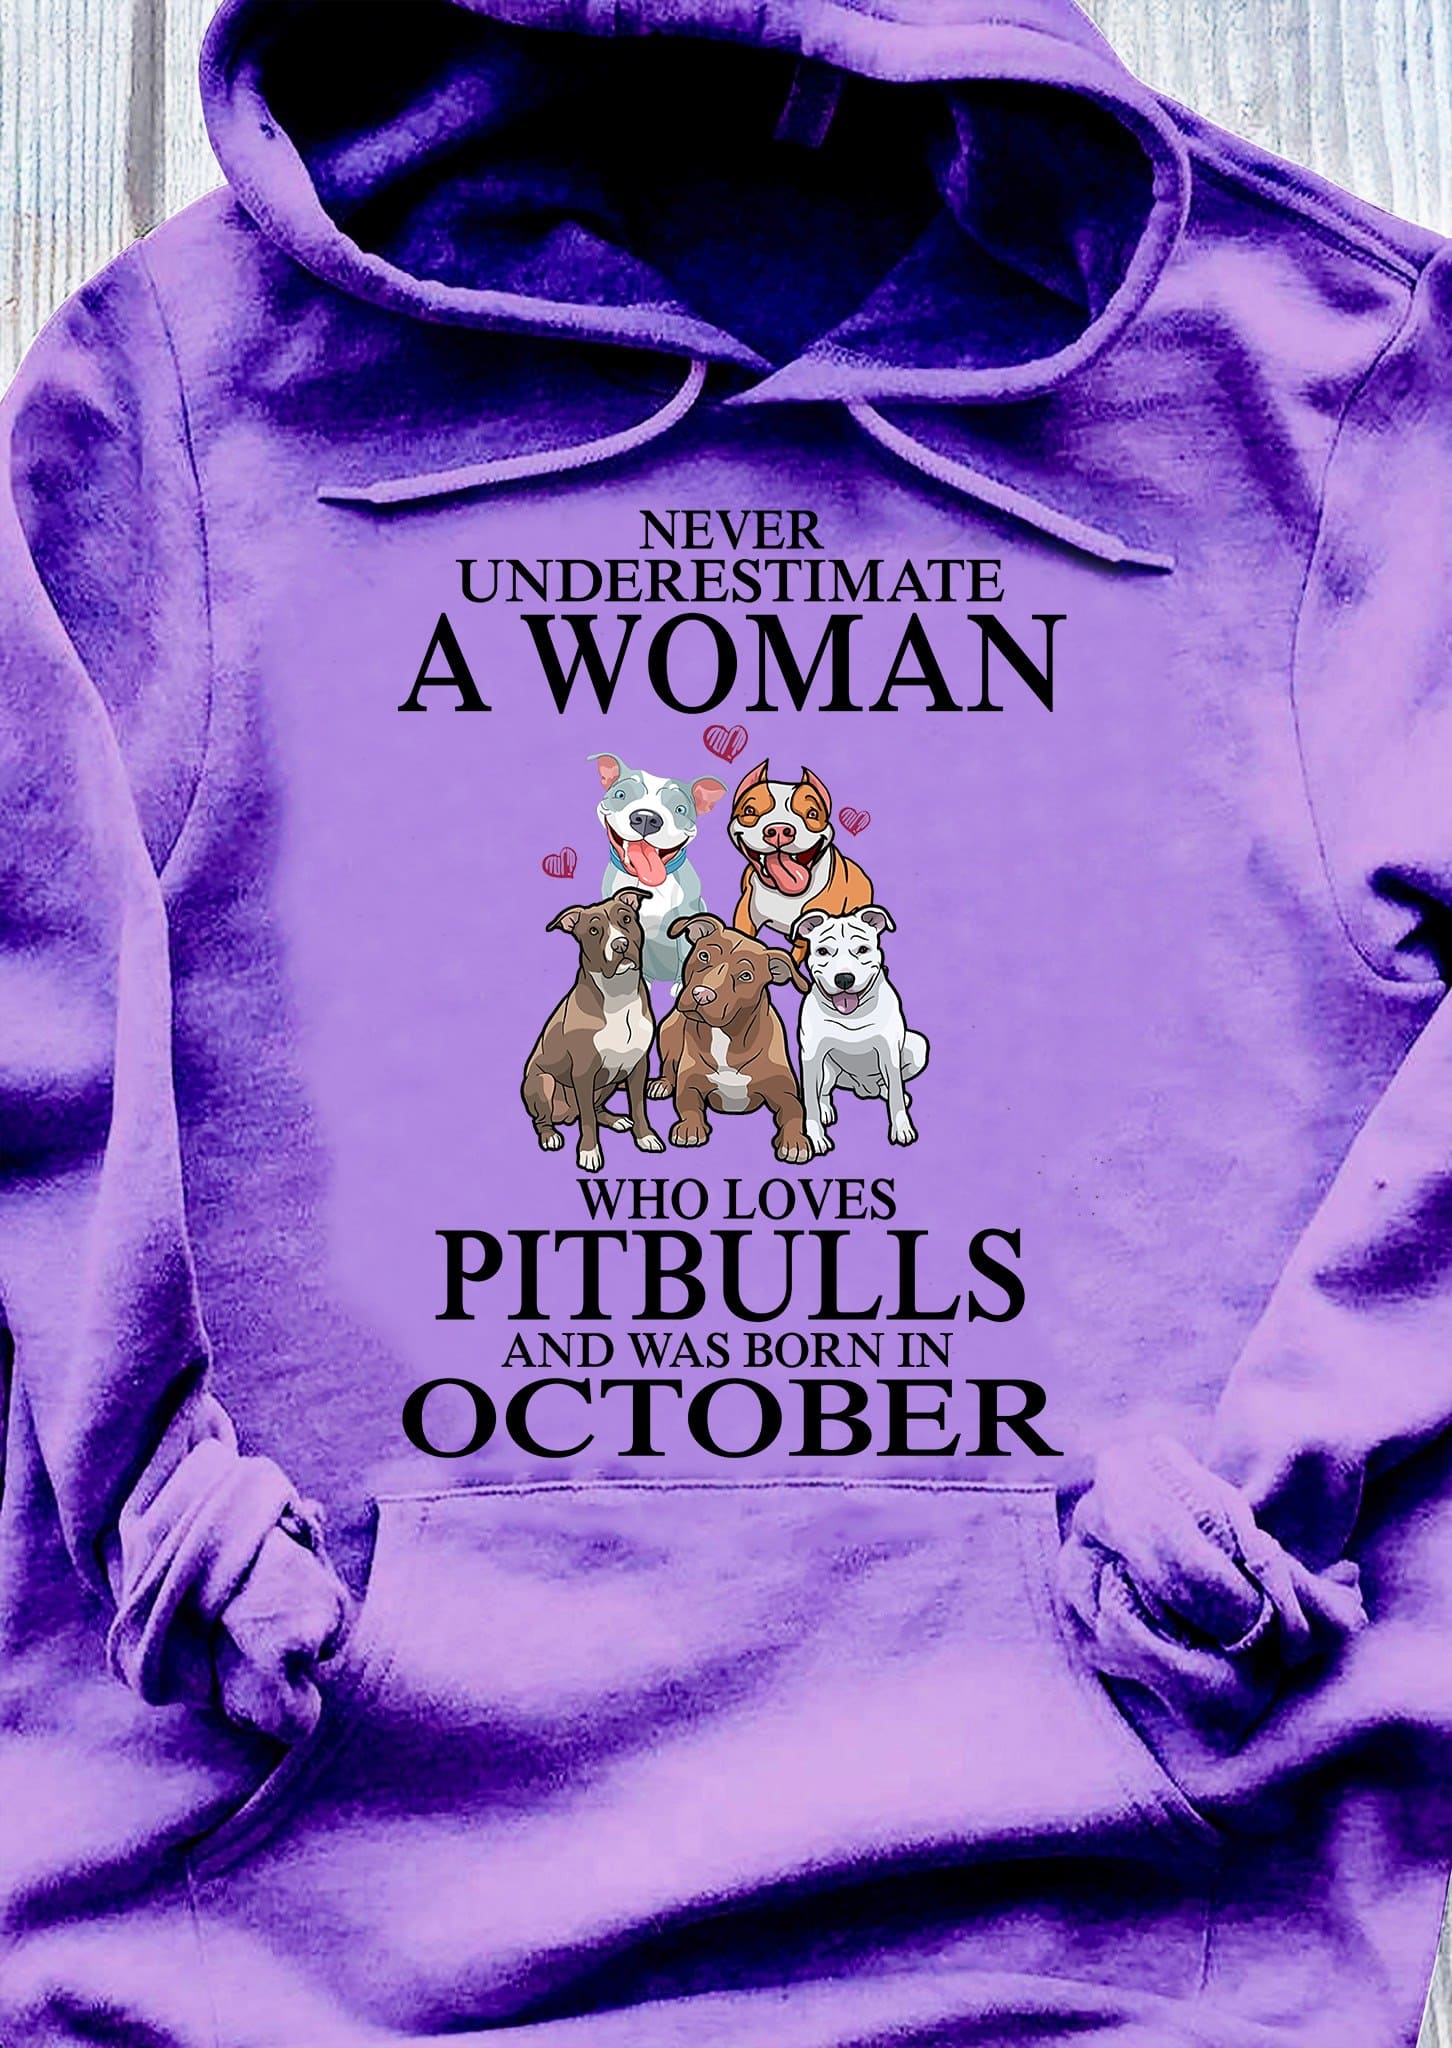 October Birthday Woman Love Pitbull - Never underestimate a woman who loves pitbull and was born in october